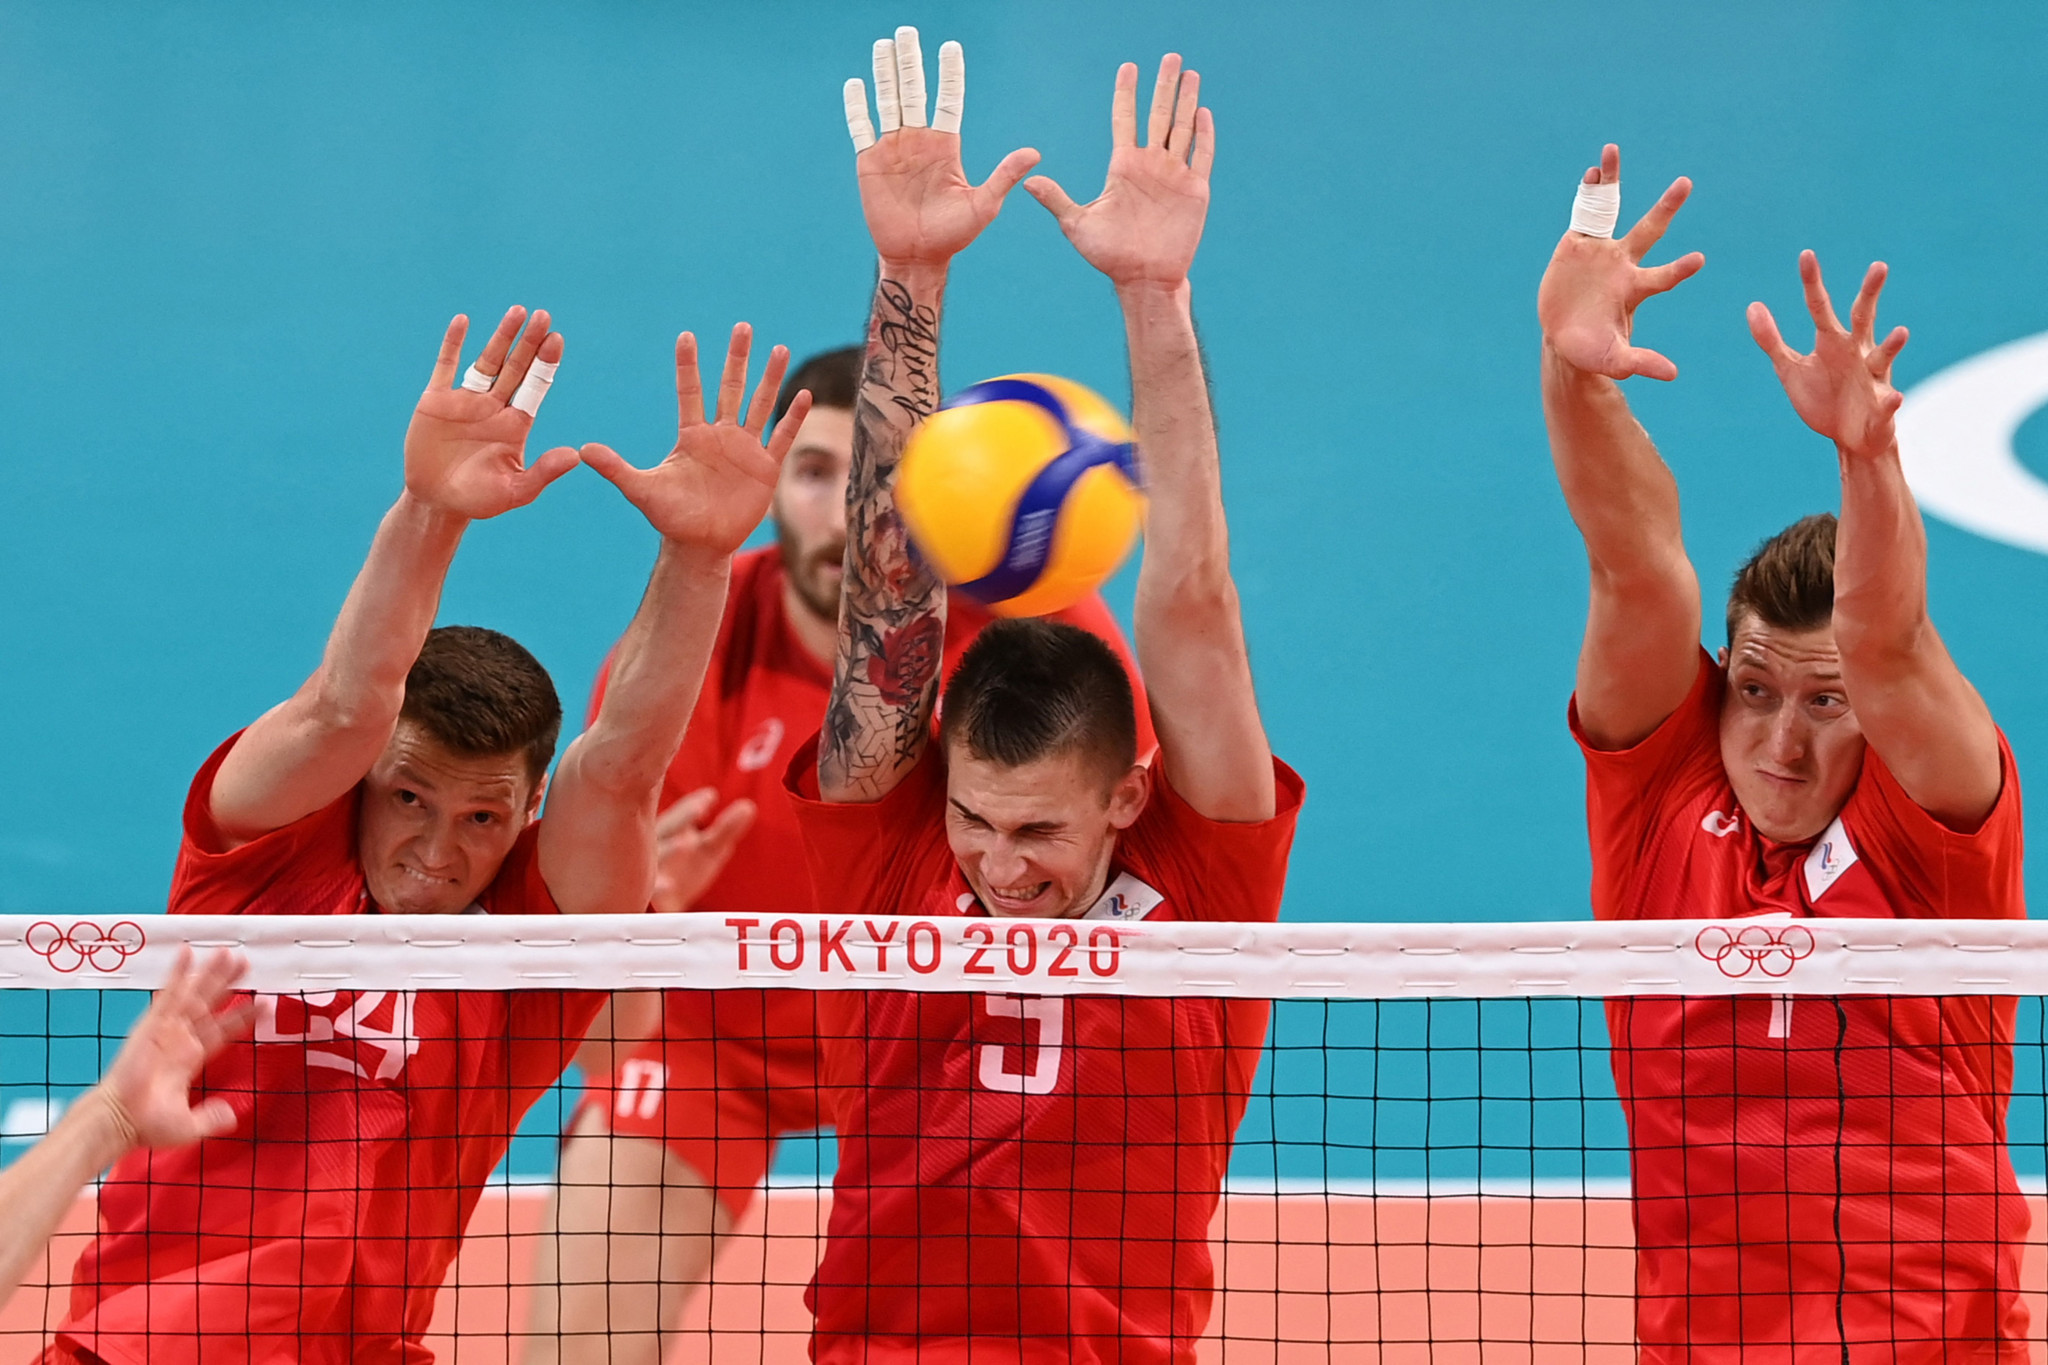 Russia and Belarus have been excluded from FIVB events since March due to the invasion of Ukraine ©Getty Images